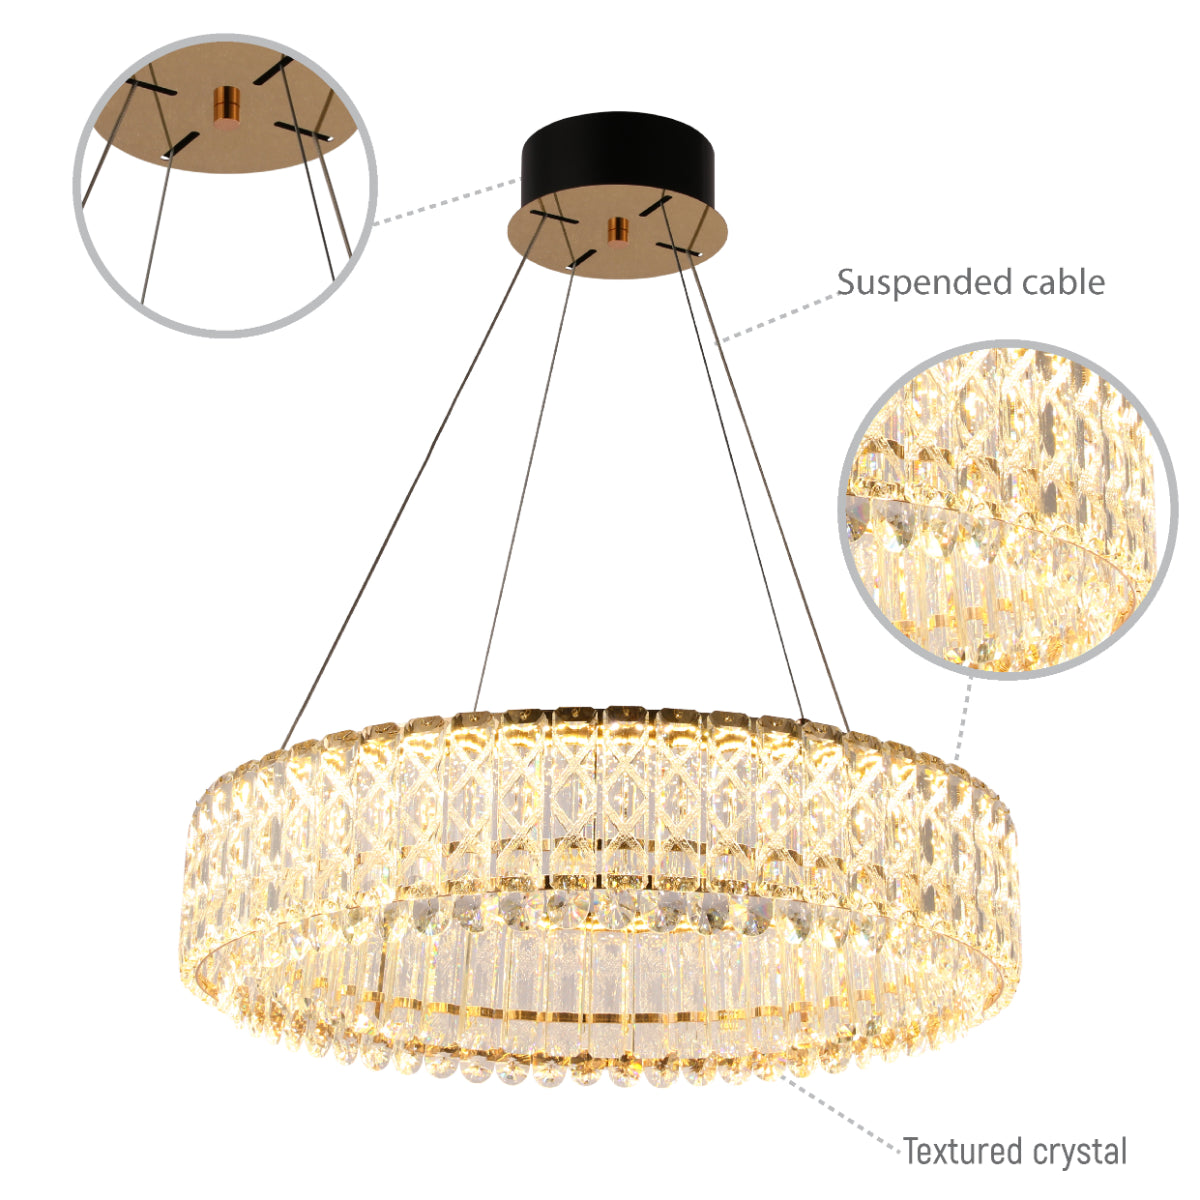 Lighting properties of Crystal Gold Pendant Chandelier Light with Remote Control 159-18216